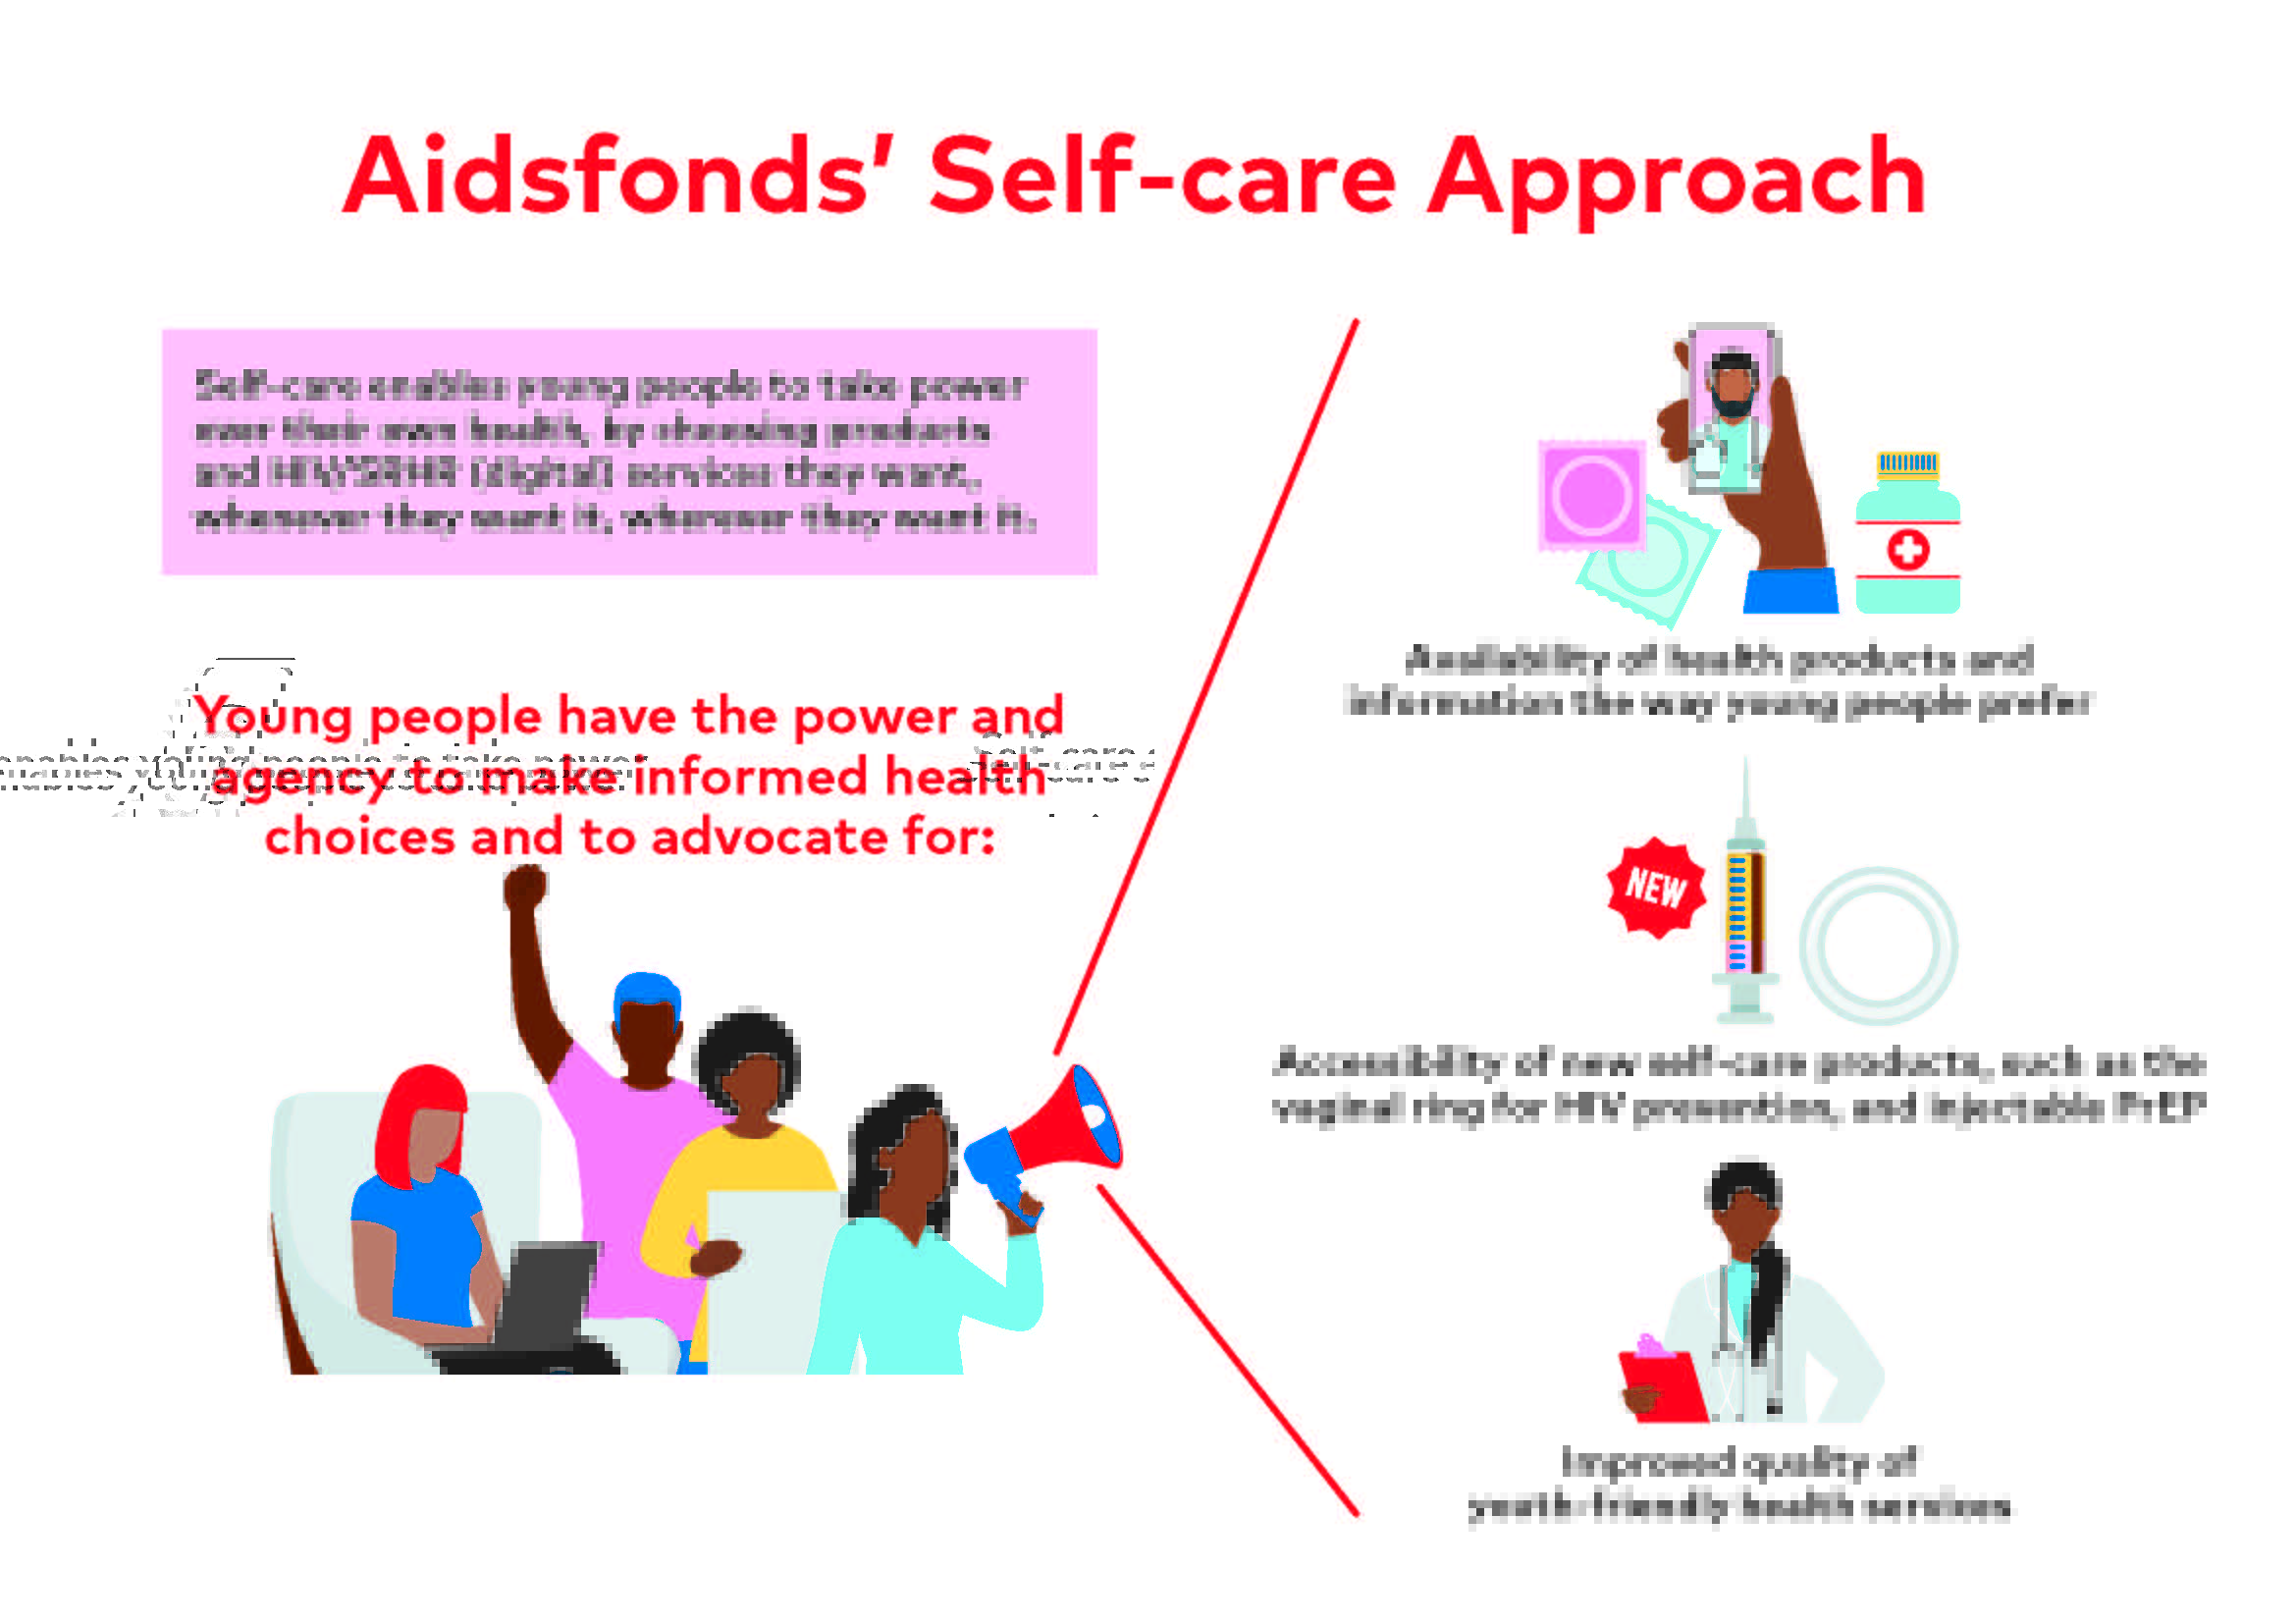 Illustration showcasing that self-care of young people leads to power and agency to make infomred health choices and advocacy for appropriate info and services